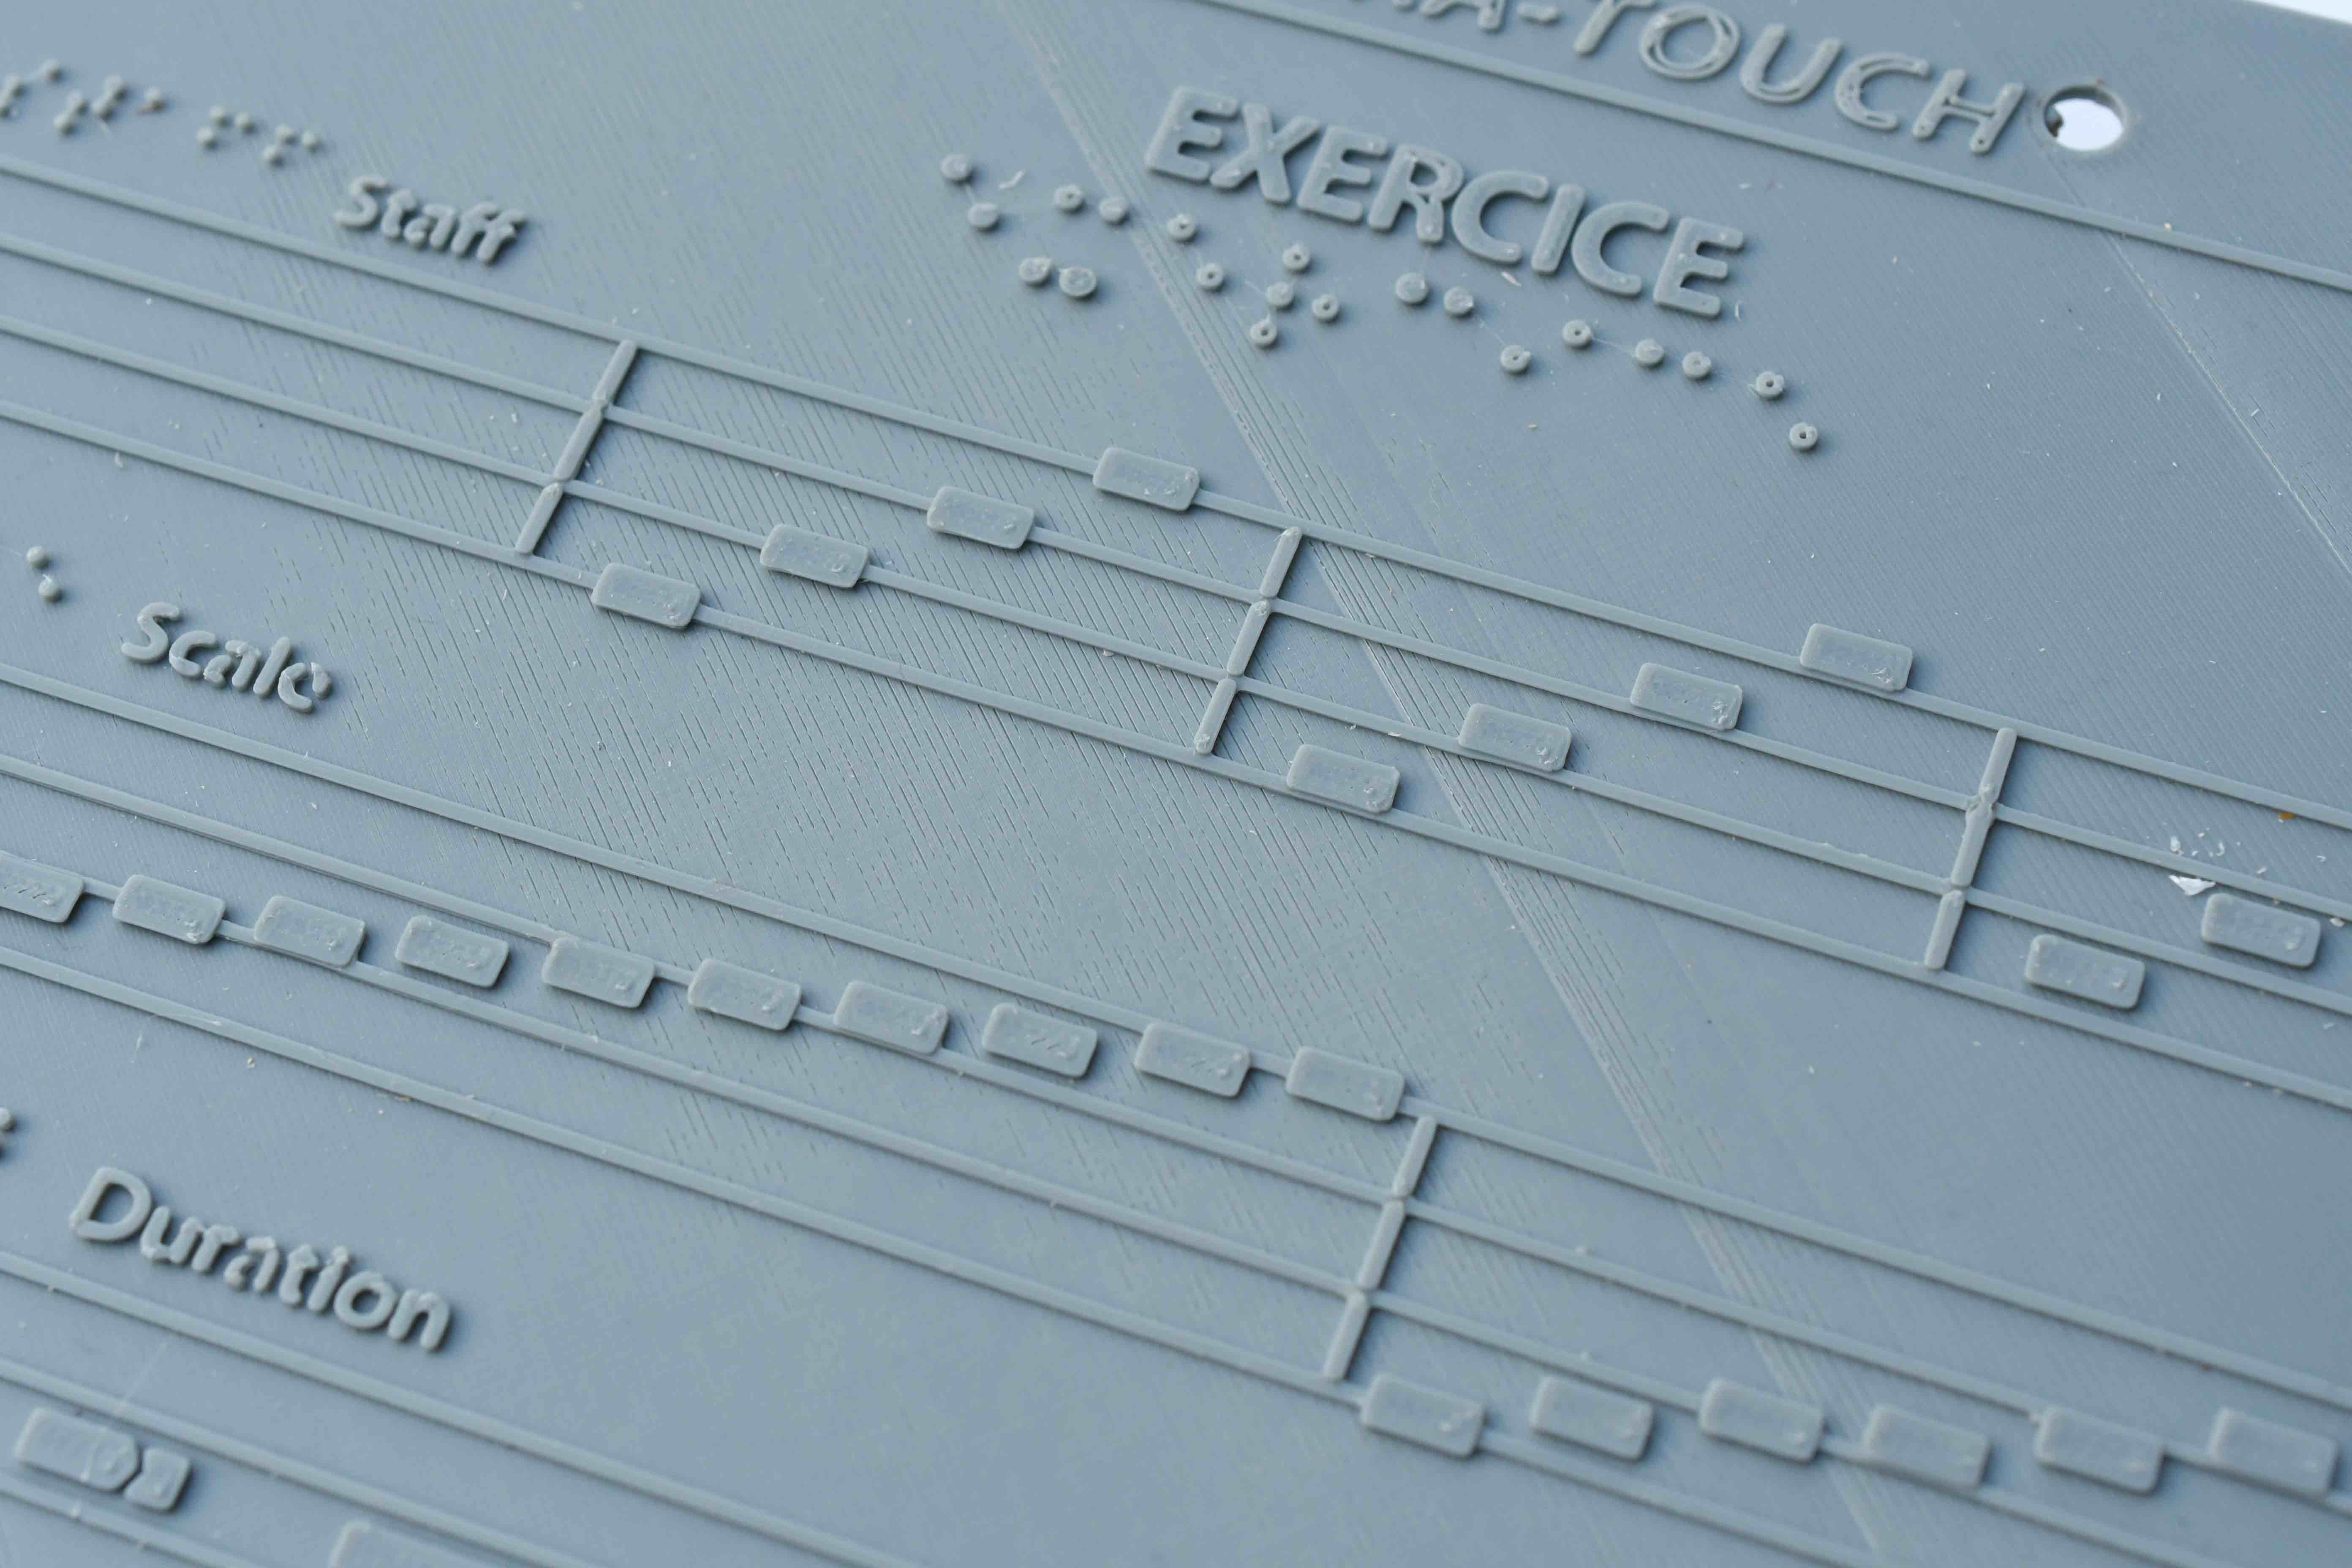 Accessible Sheet Music for blind musicians